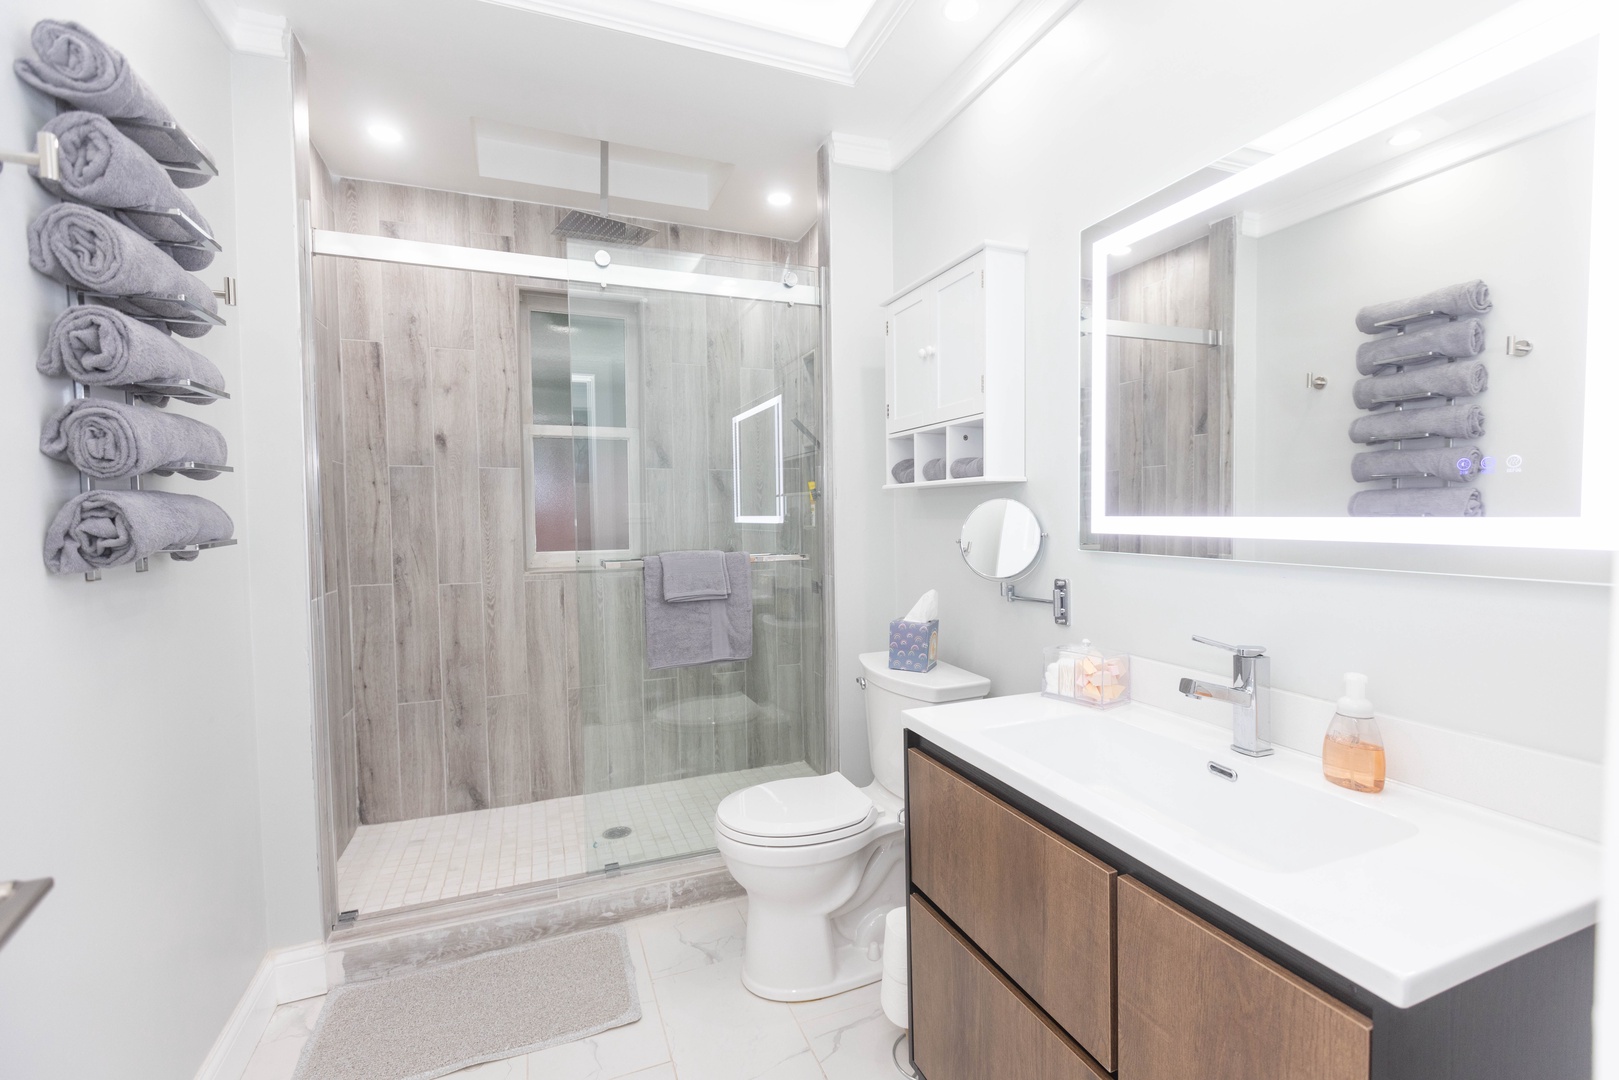 This 2nd floor full bath includes a single vanity & spa- like glass shower